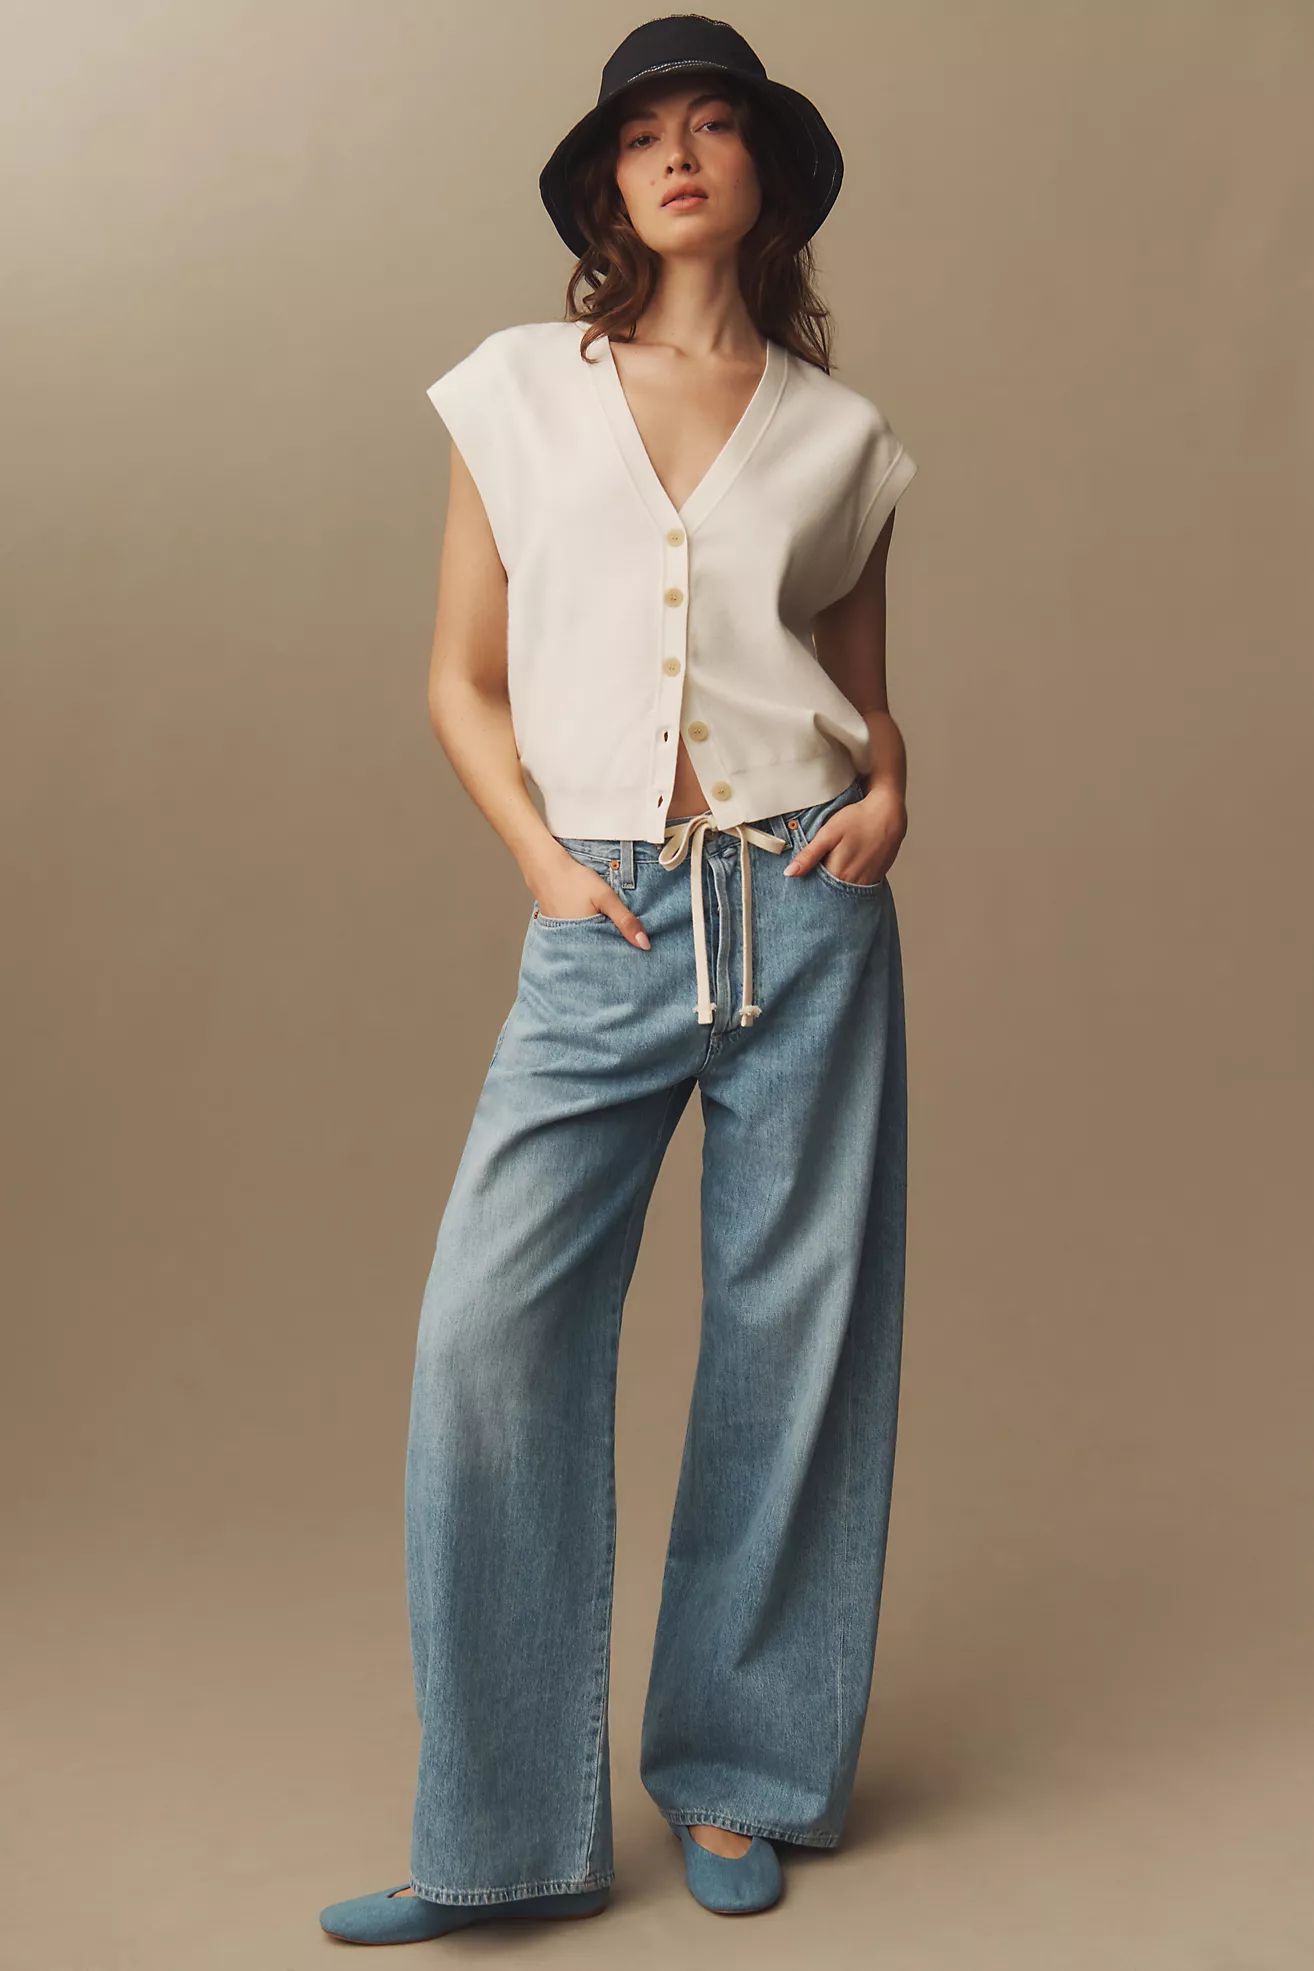 Maeve Slouchy Cardigan Sweater Vest | Anthropologie (US)